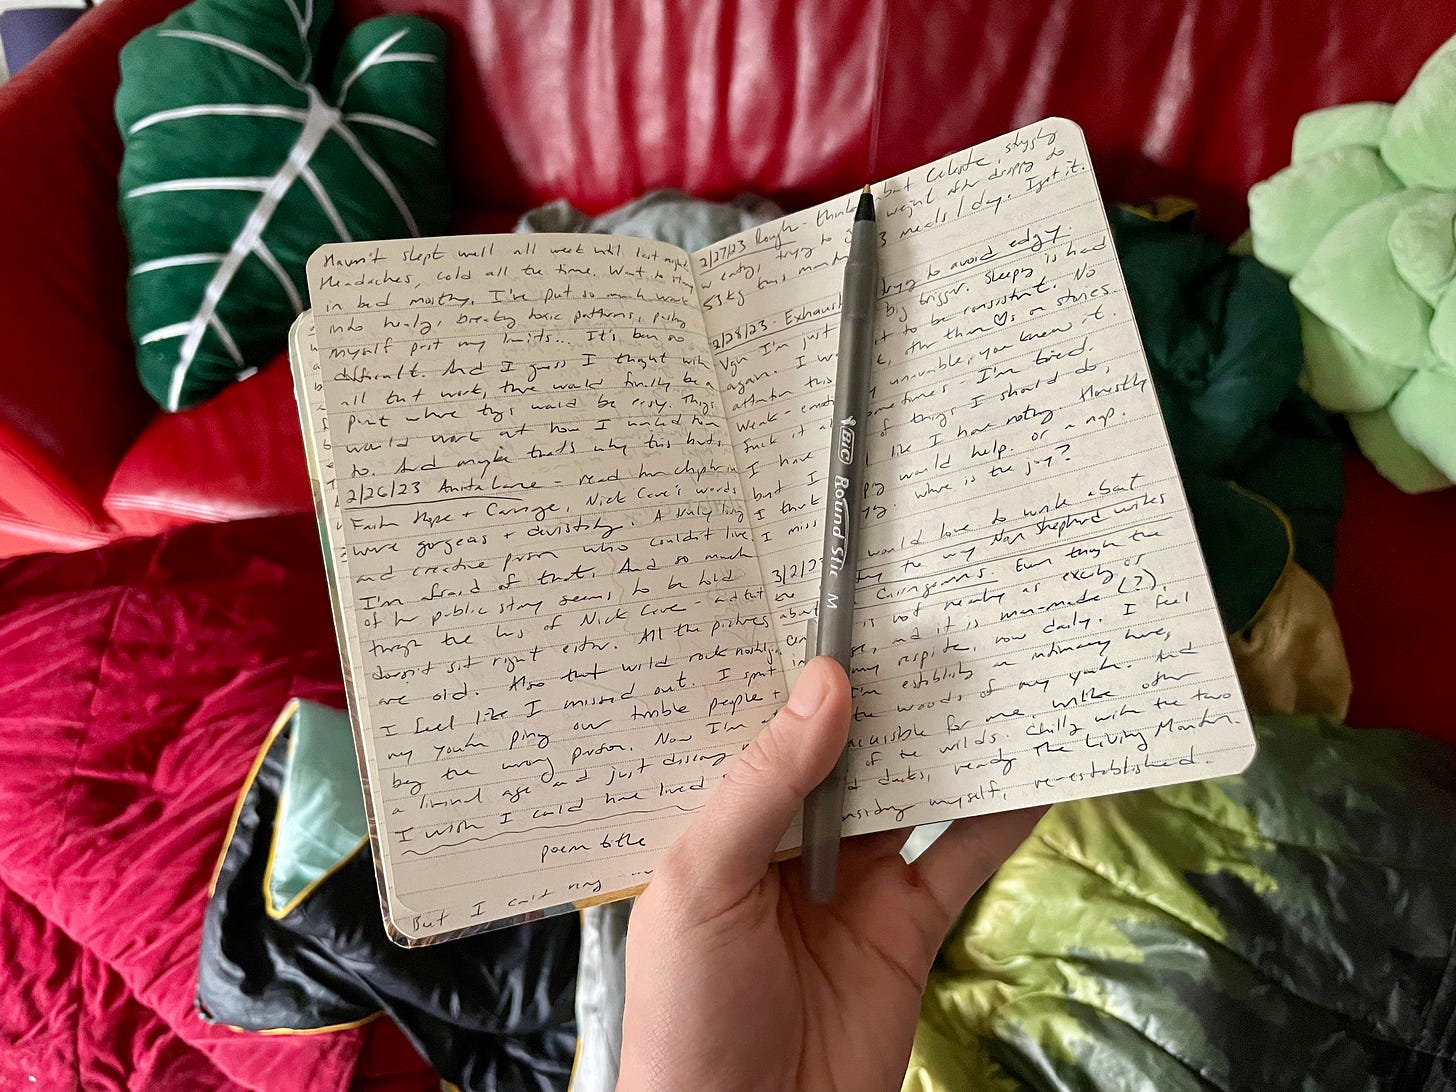 Photograph of a handwritten journal, held by a hand against a background of a red leather couch covered in succulent pillows and blankets.